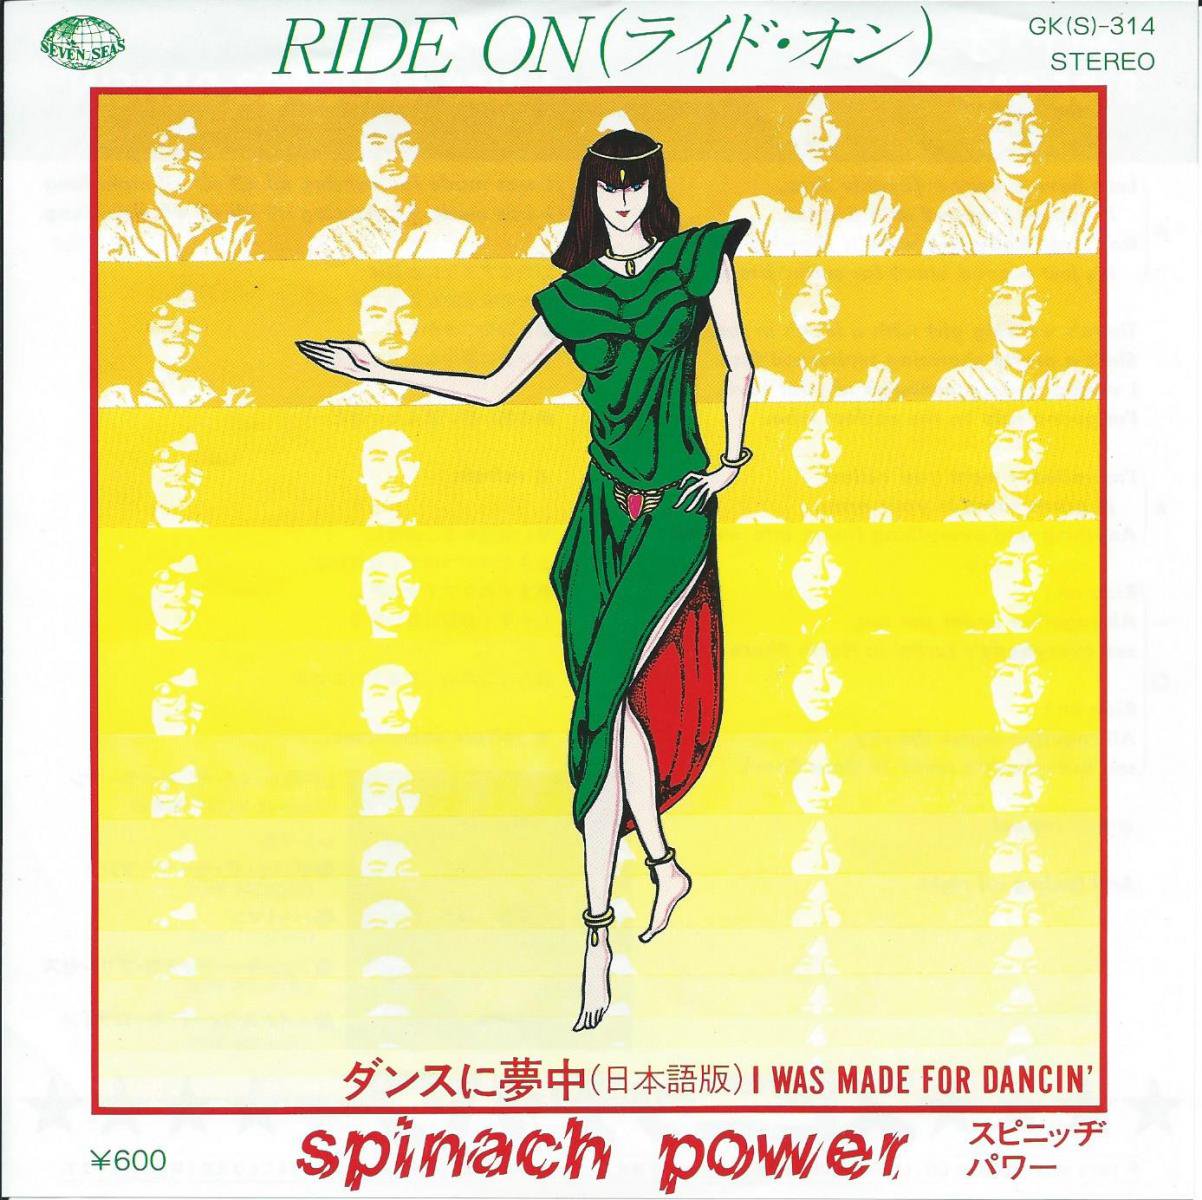 ԥ˥å¡ѥ SPINACH POWER / 饤ɡ RIDE ON / 󥹤̴ (ܸ) I WAS MADE FOR DANCIN' (7